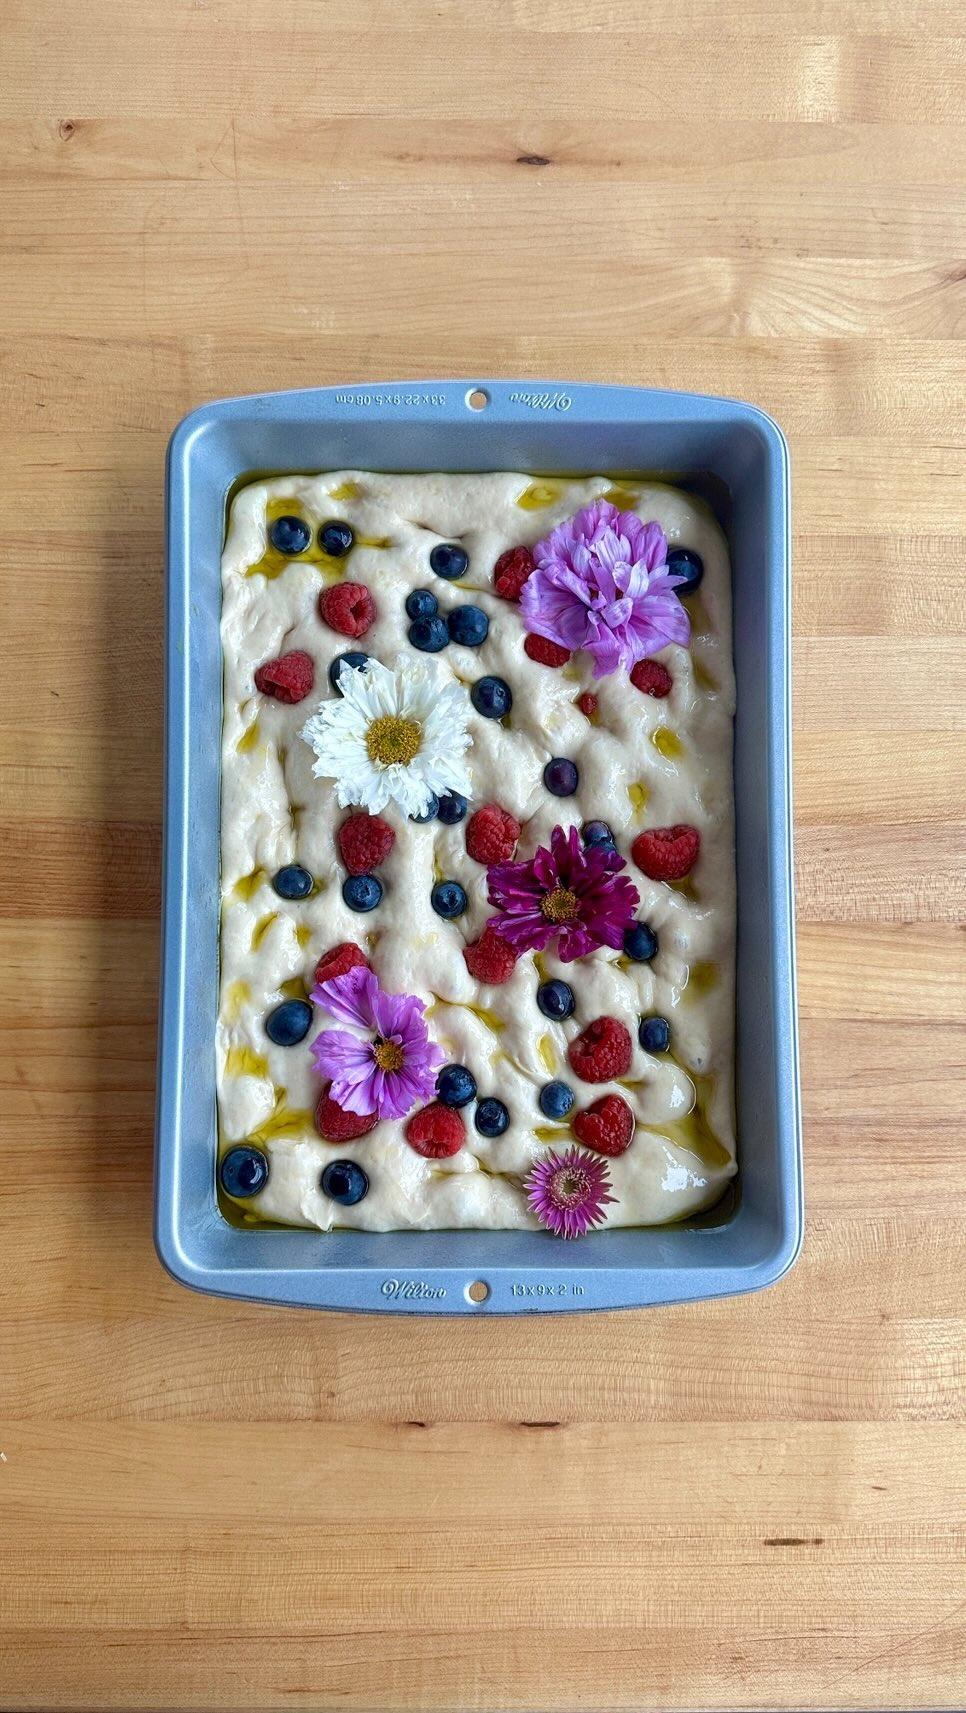 class="content__text"
 Focaccia &amp; Berries
@chef.joe.sasto already revealed the final bake!

400g Bread Flour
100g Durum Flour
385g water
5g instant yeast
5g sugar
13g salt
60g oil

Autolyse for 45min
Bloom yeast and sugar
Mix for 10 minutes
Rest for 10minutes
Add salt and oil
Proof with folds every 45minutes
Rest overnight
Bake 400F 

 #focaccia #breadbaking #bread #tastemade #breadlover #bakersofinstagram 
 